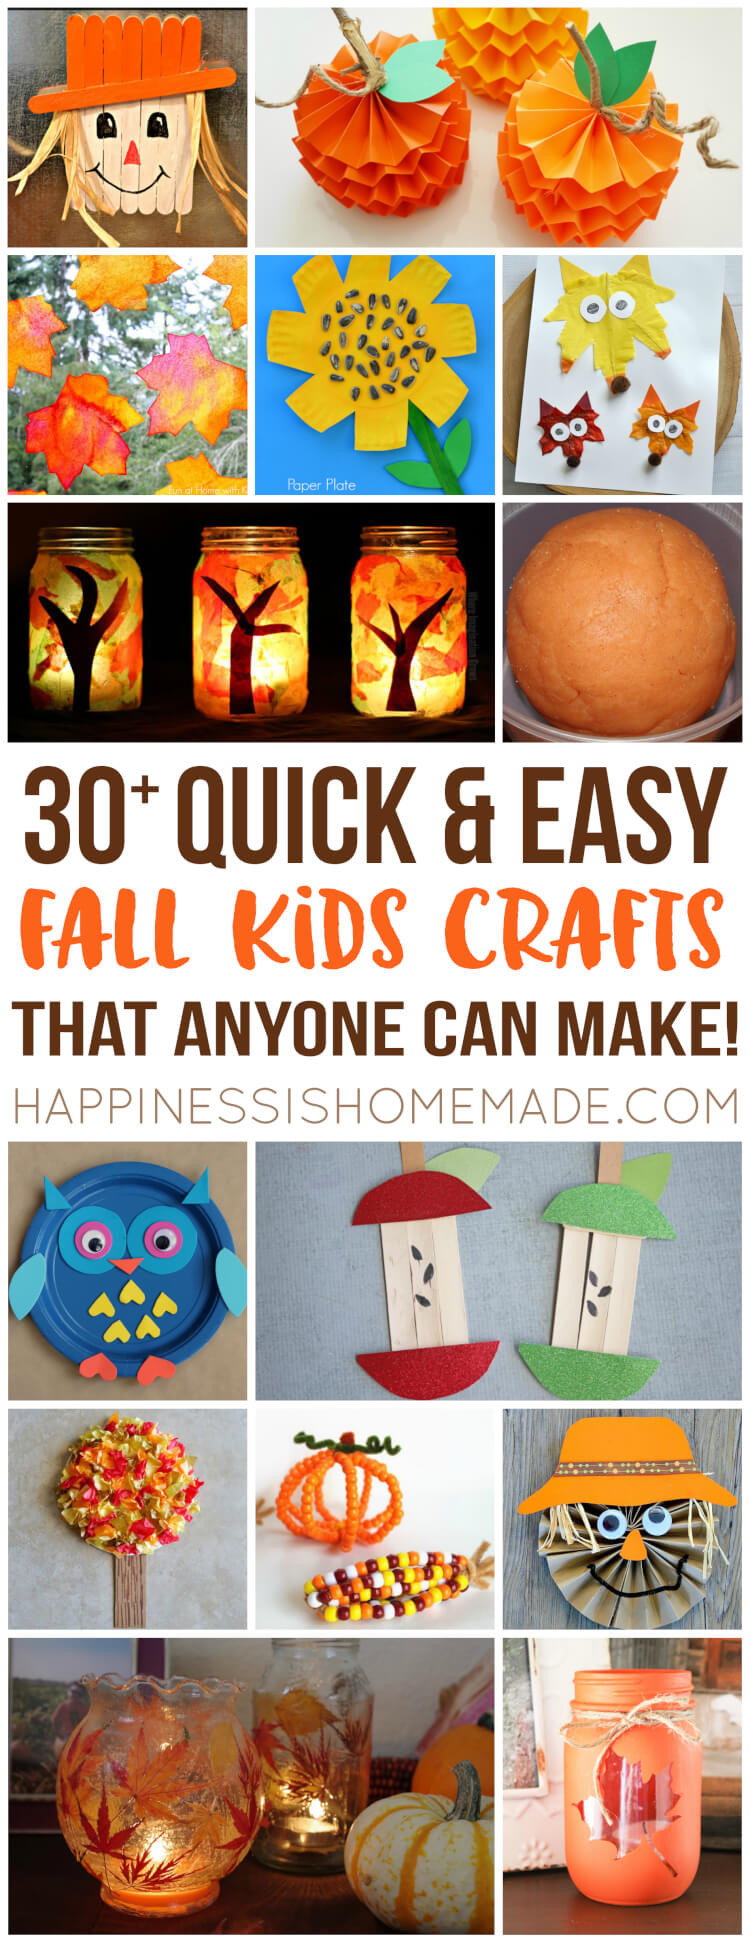 Fall Craft Idea For Kids
 Easy Fall Kids Crafts That Anyone Can Make Happiness is